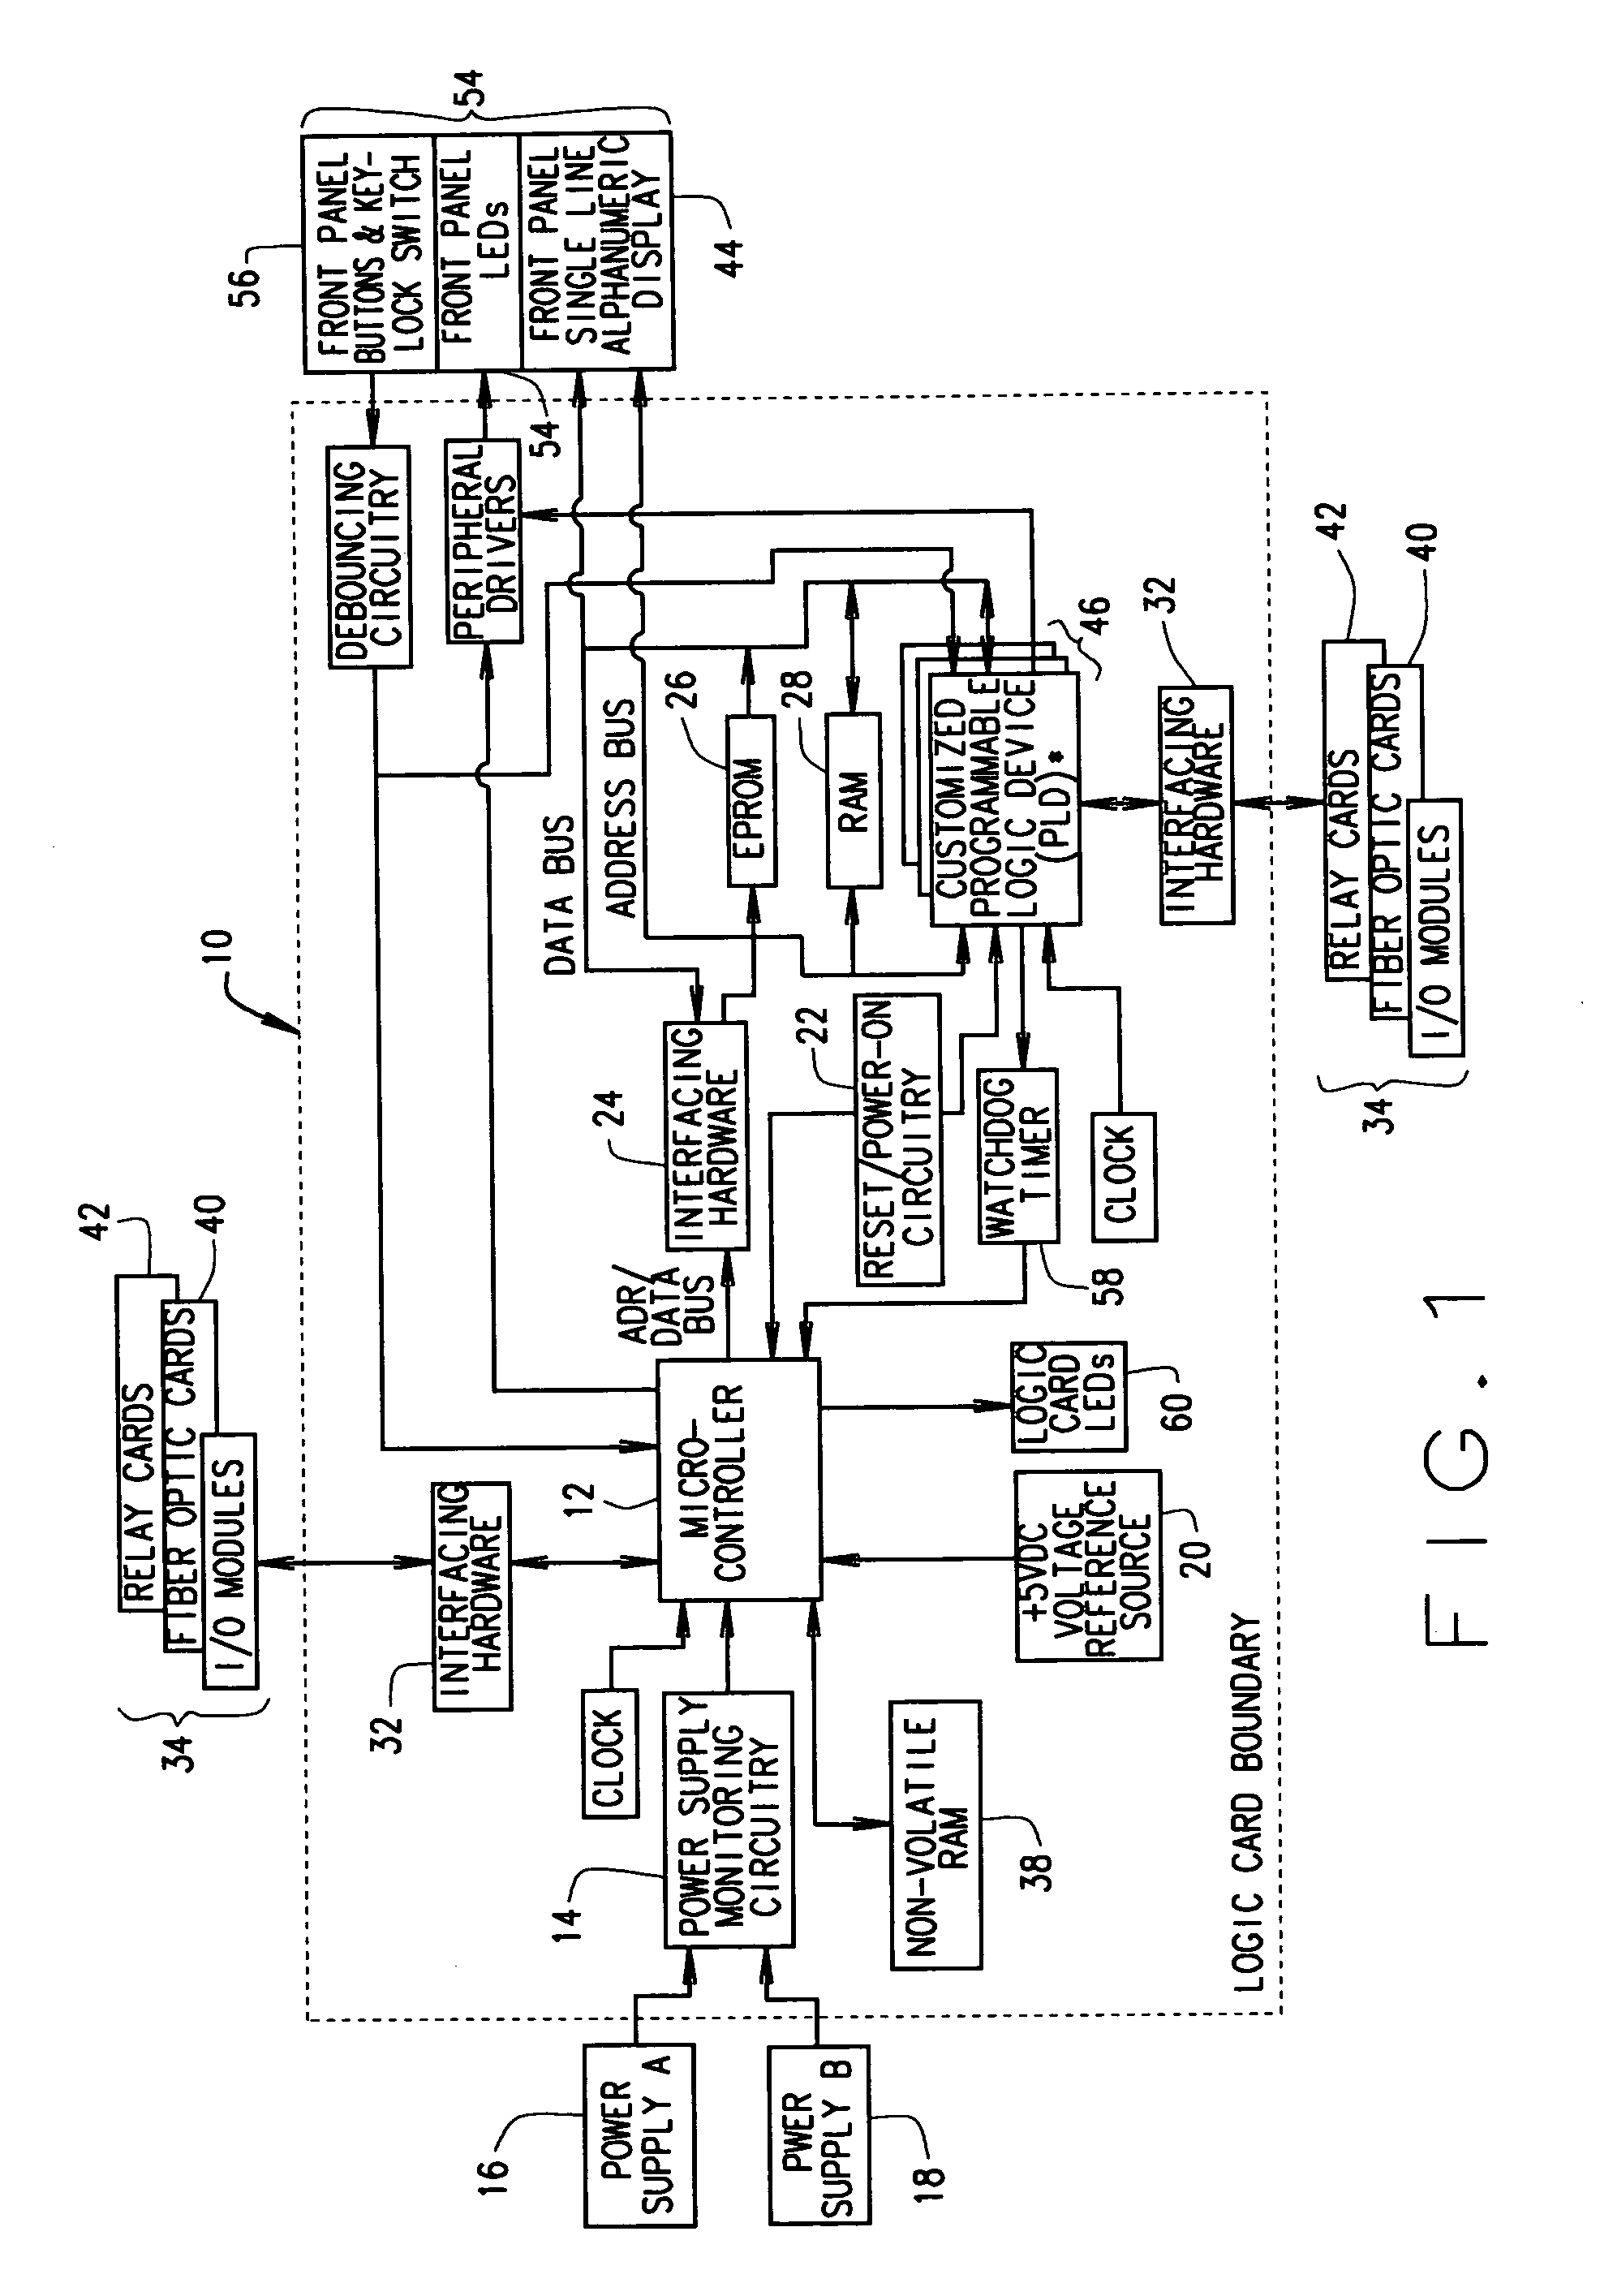 Methods and apparatus for safety controls in industrial processes